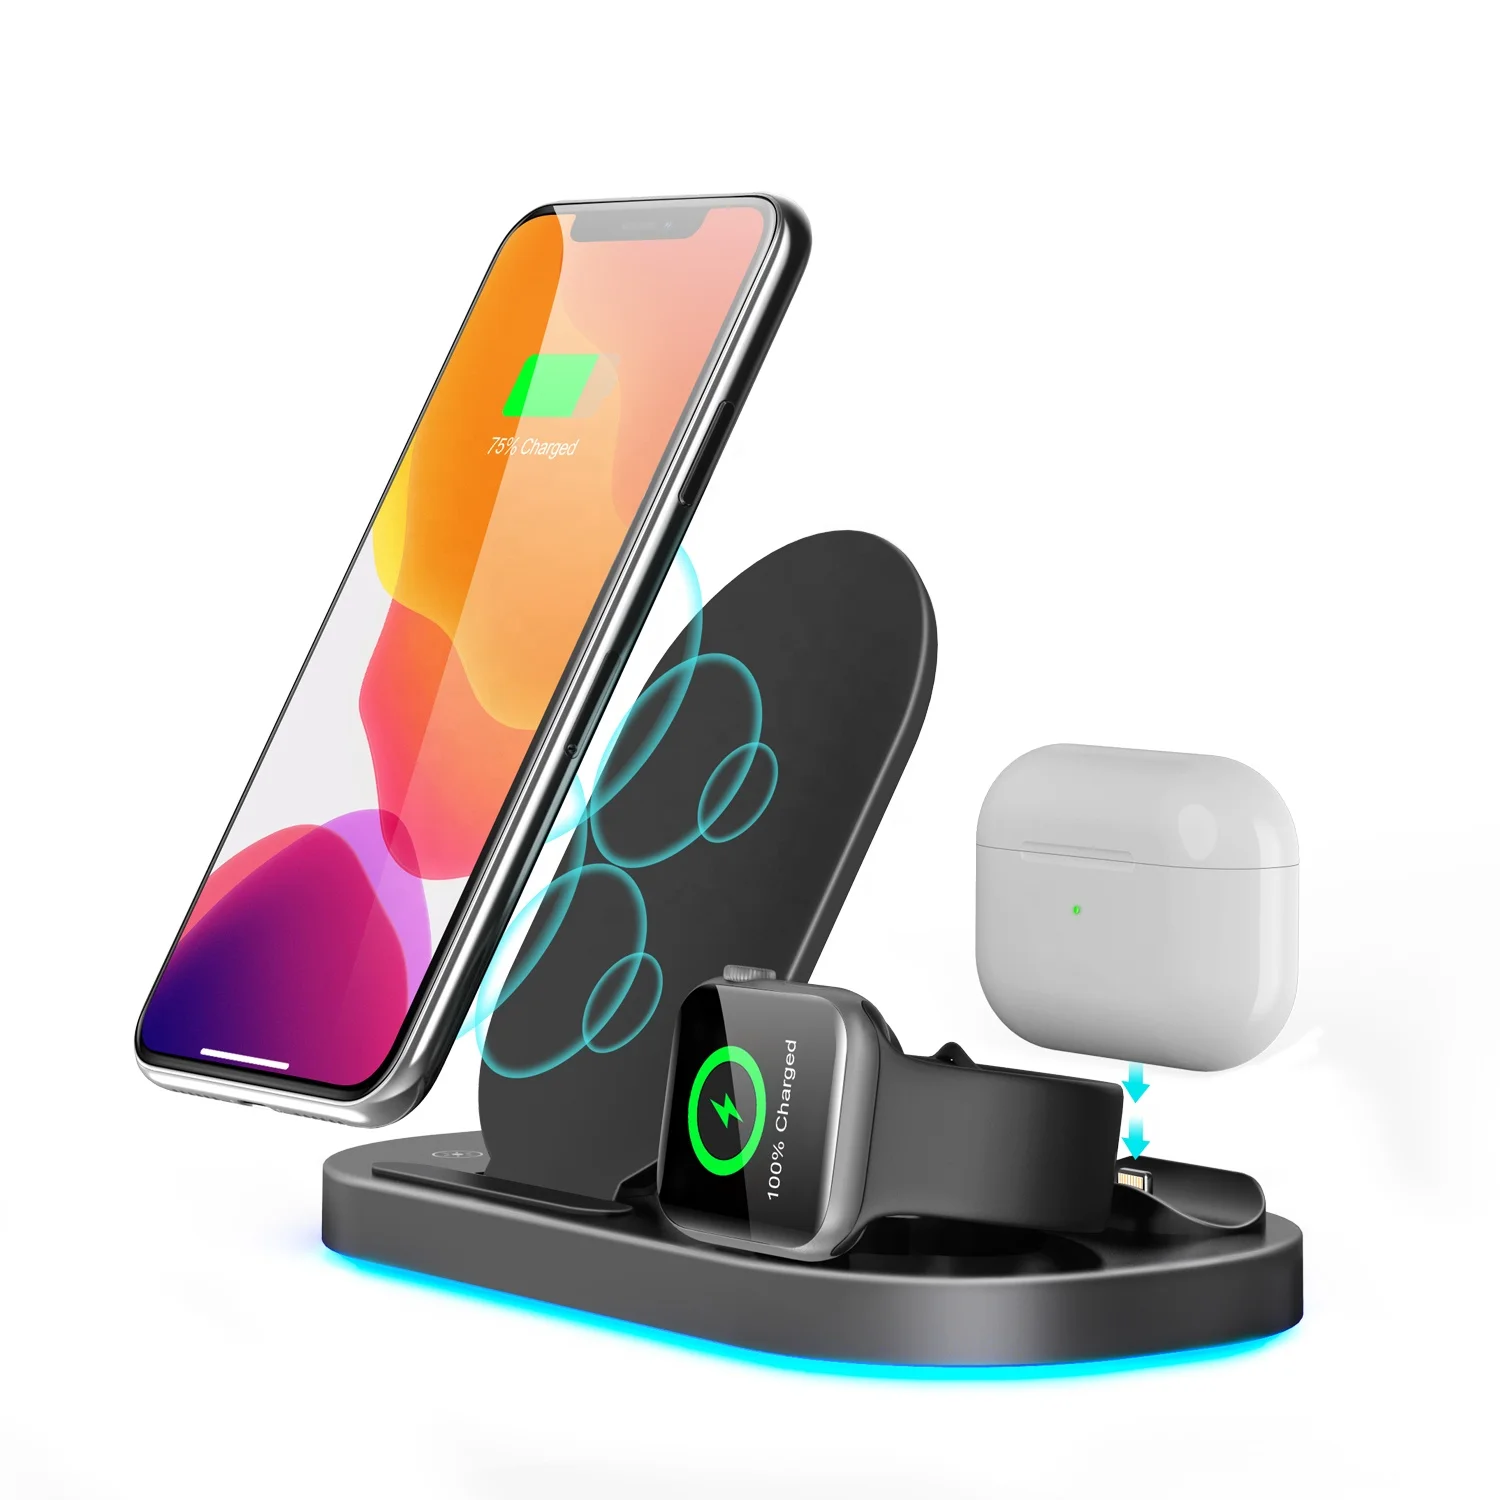 

SIKAI Amazon Hot CE FCC ROHS certification New Arrival Ready stocks Foldable Fast Portable 3 in 1 Qi Wireless Charger